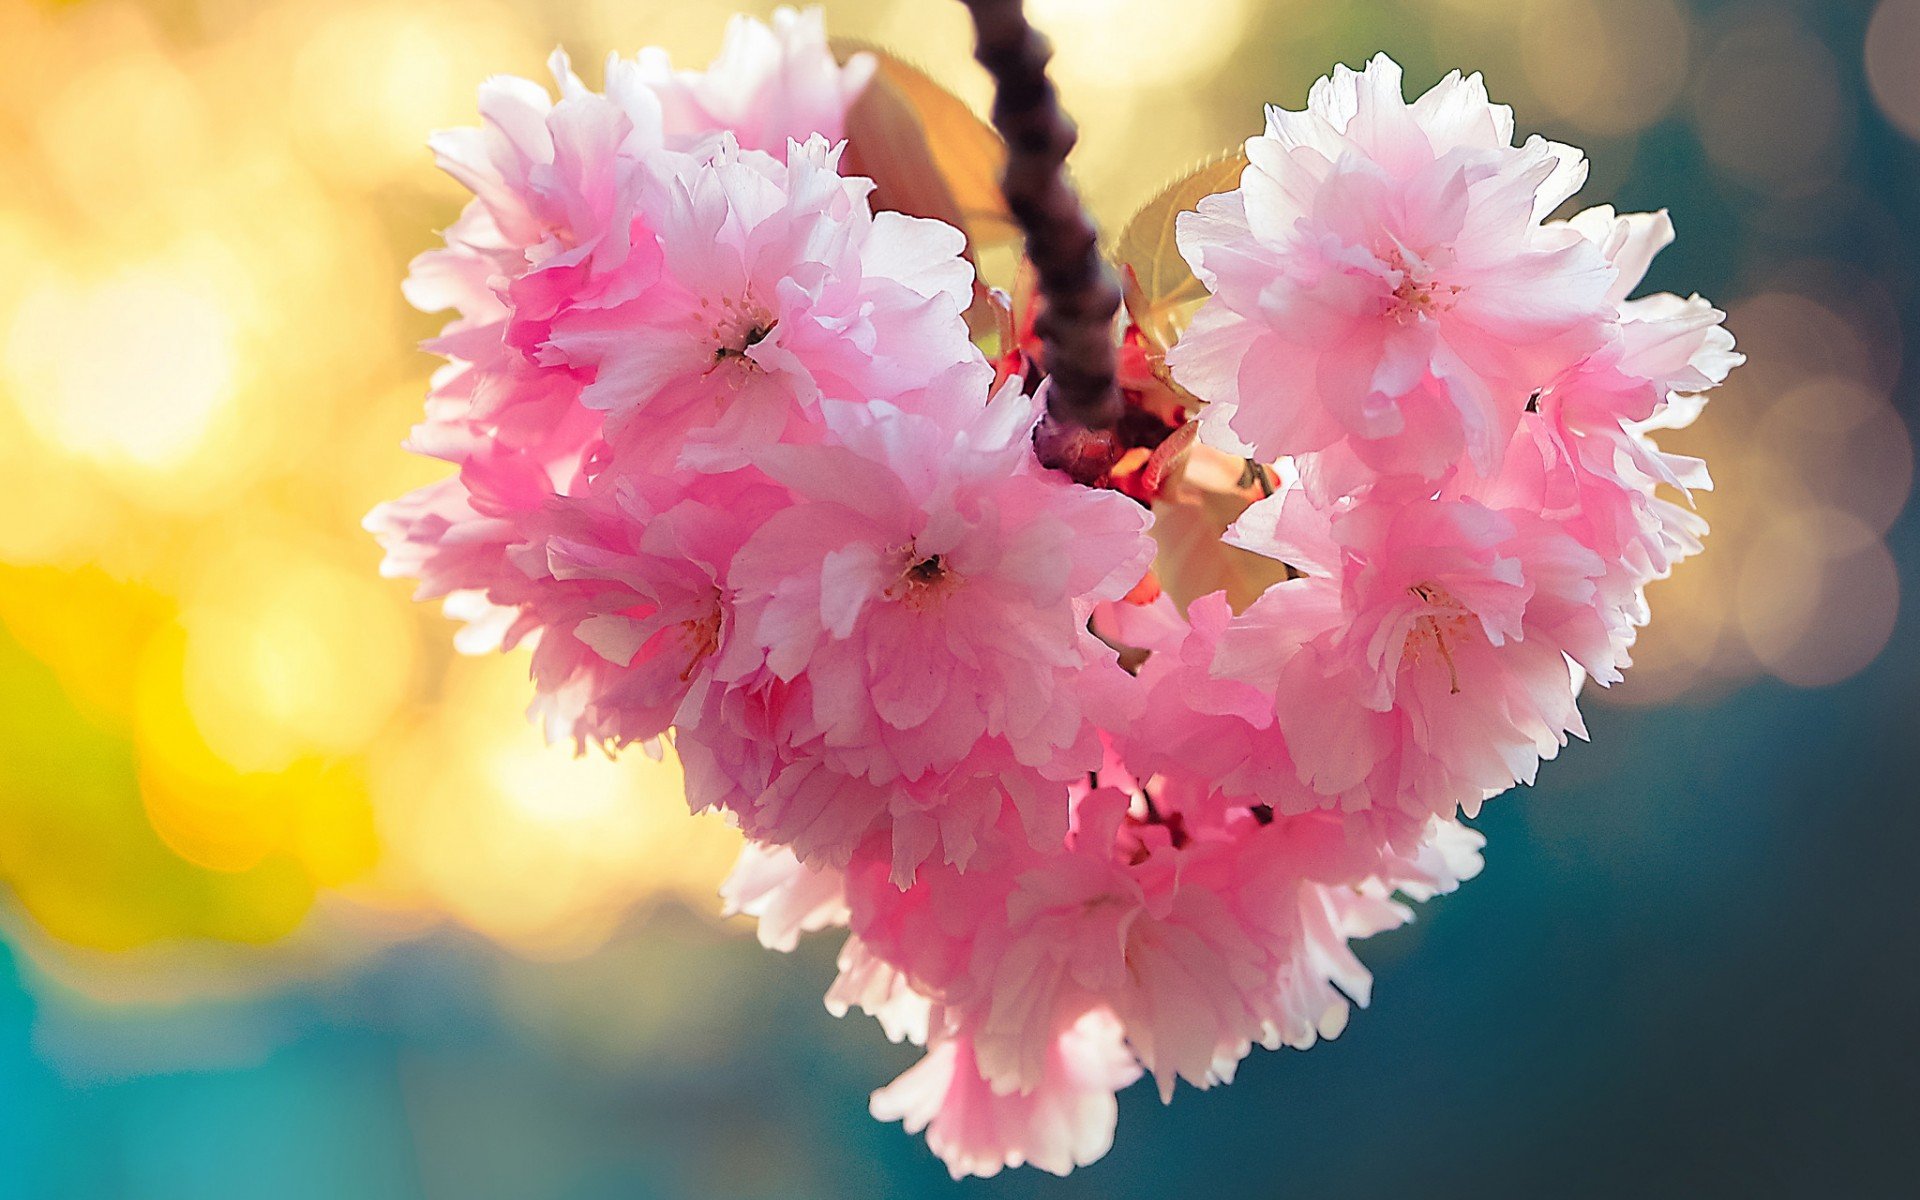 heart, Bloom, Love, Heart, Flowers, Nature, Spring ...
 Images Of Nature And Flowers